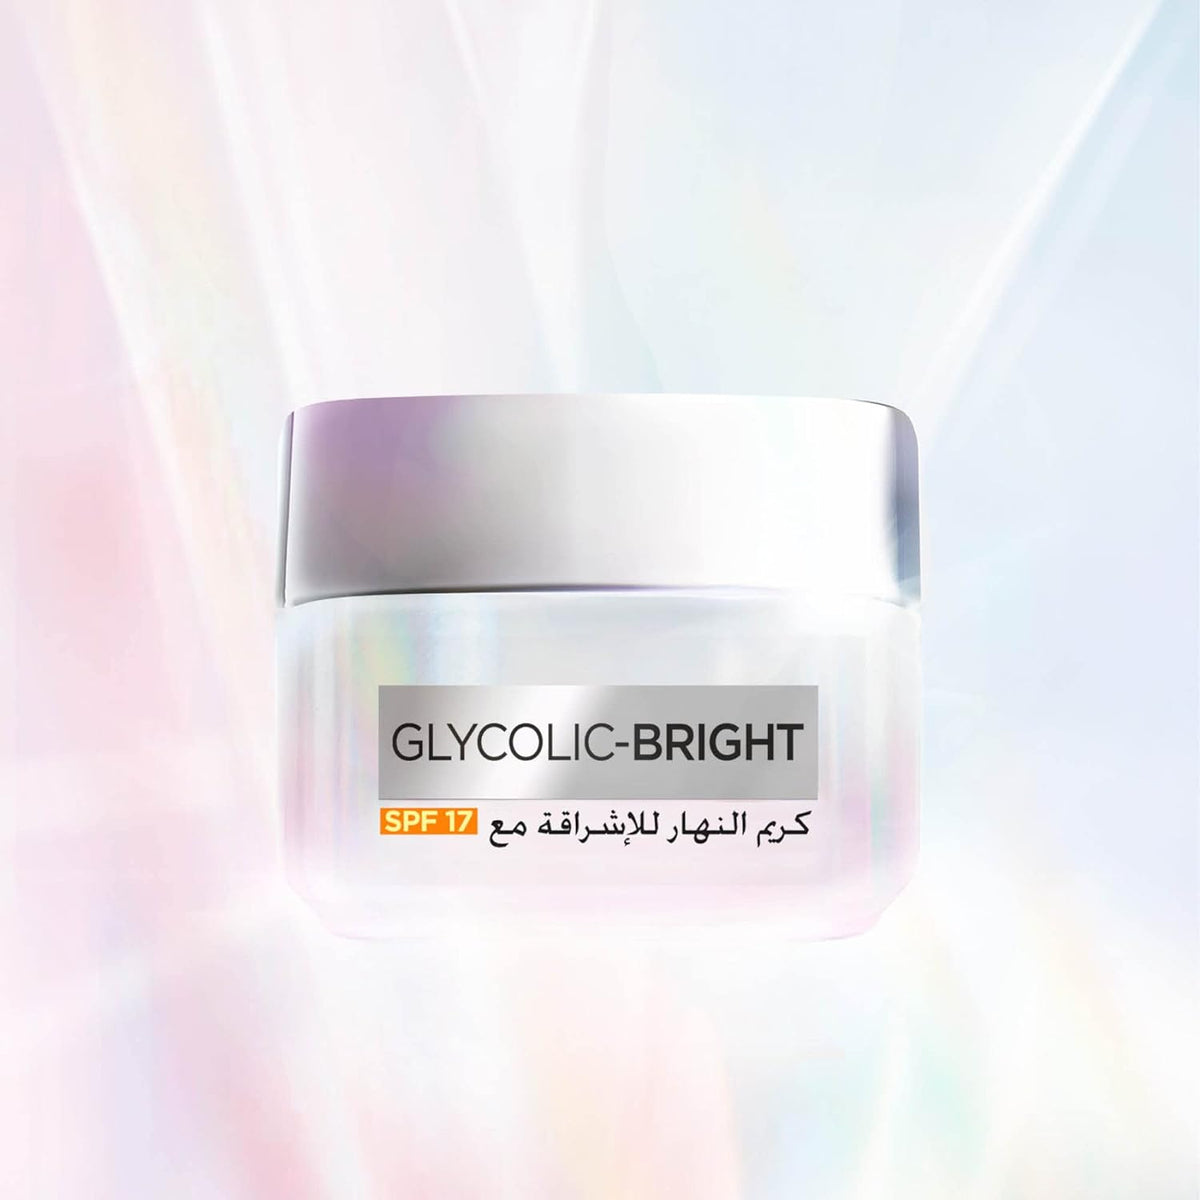 L'Oréal Paris Glycolic Bright Glowing Day Cream with SPF17 50ML